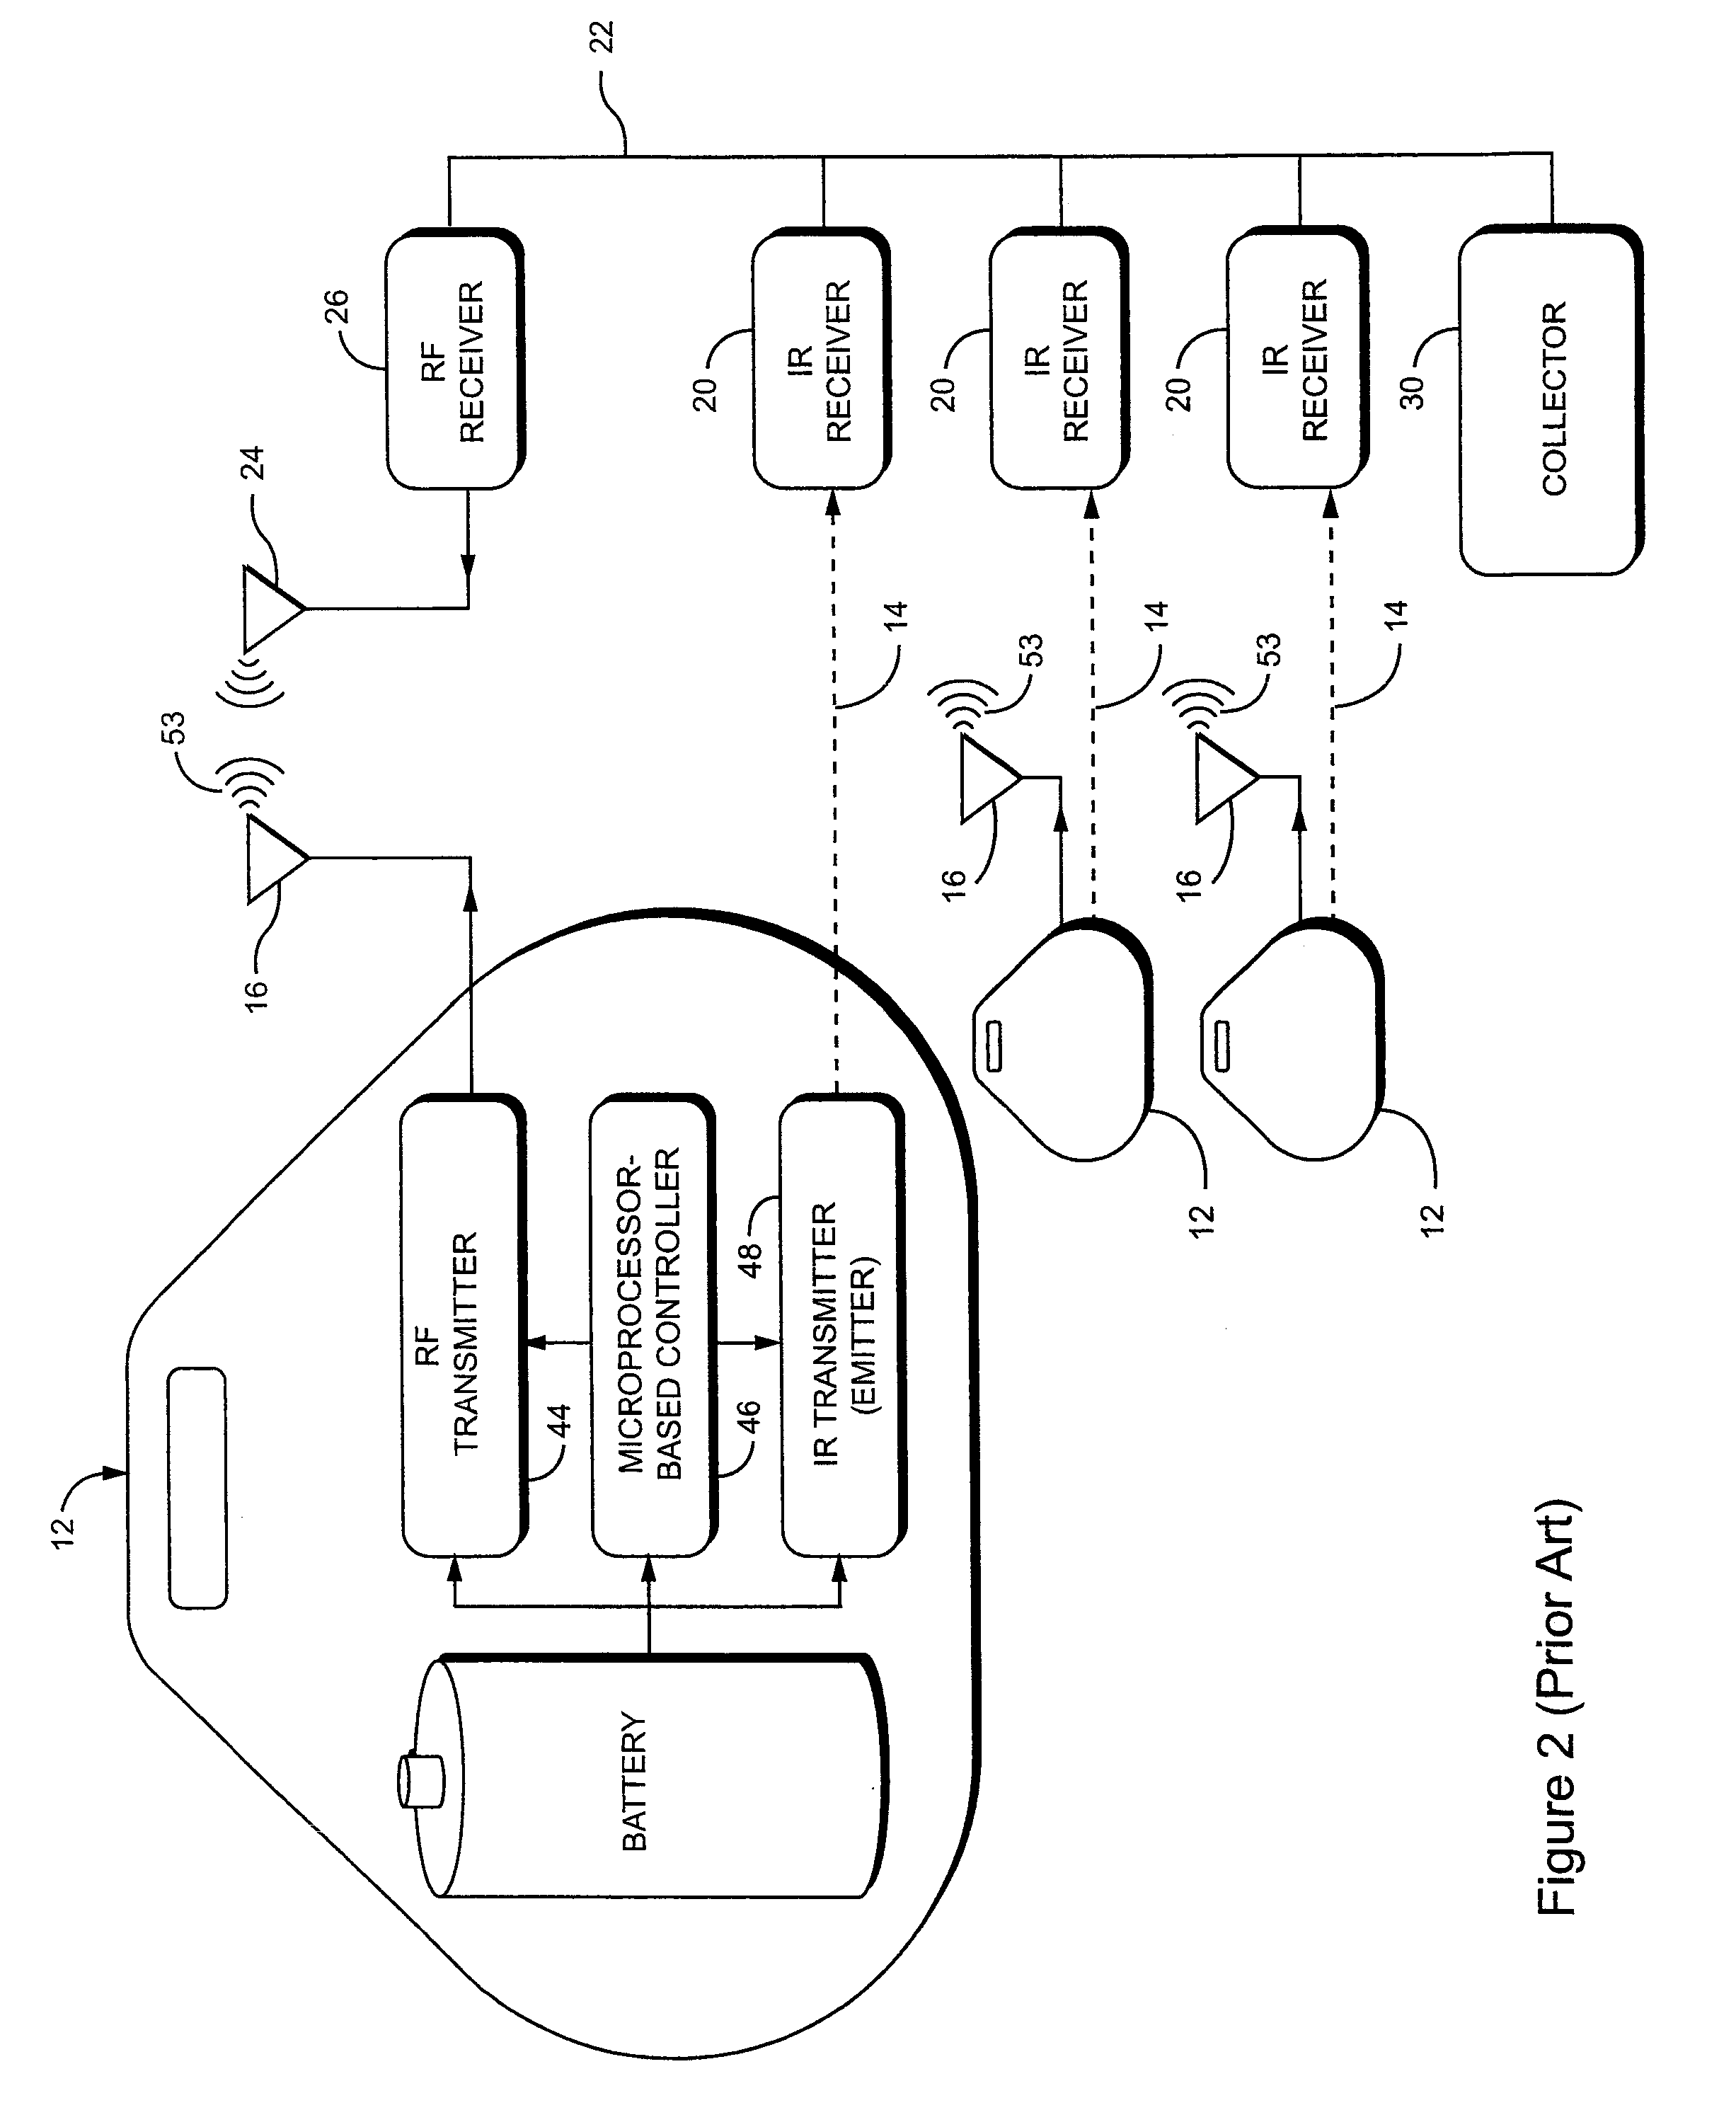 Real-time method and system for monitoring hygiene compliance within a tracking environment